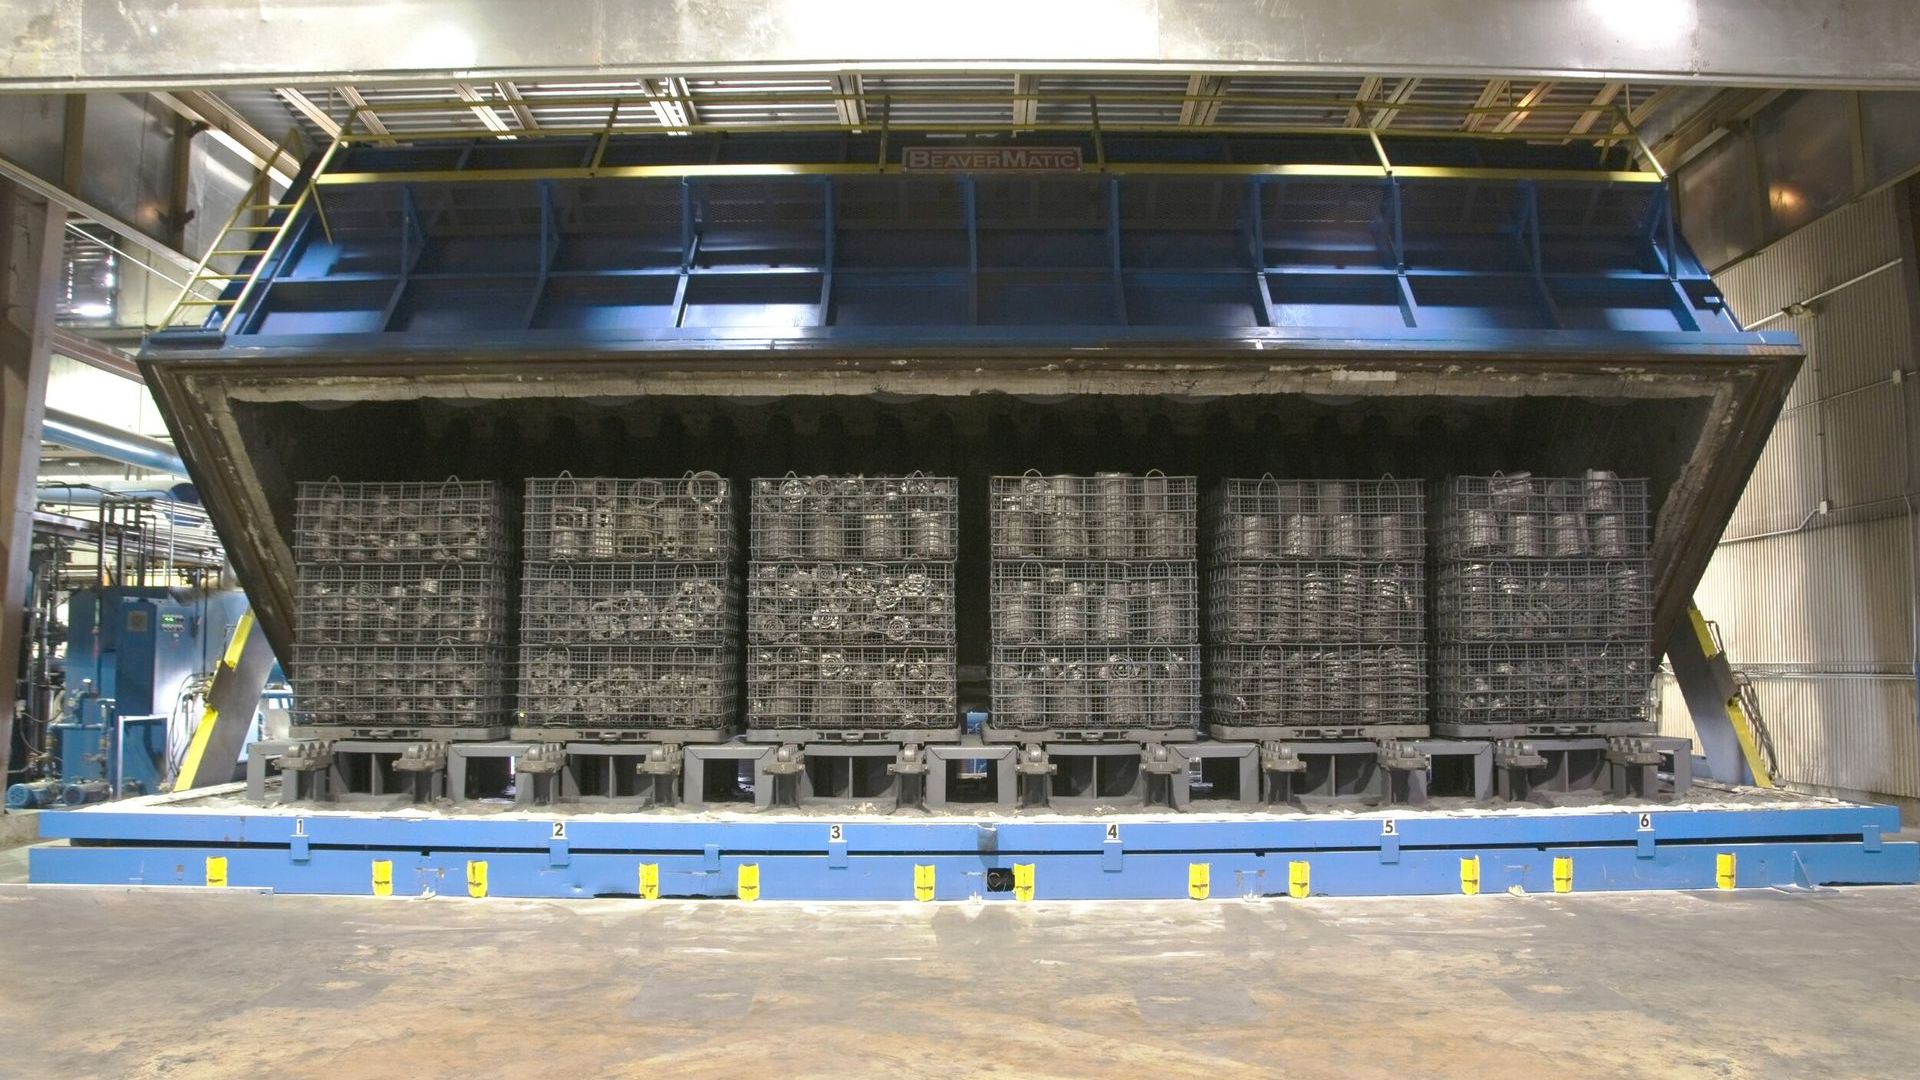 Large metal cages filled with metal